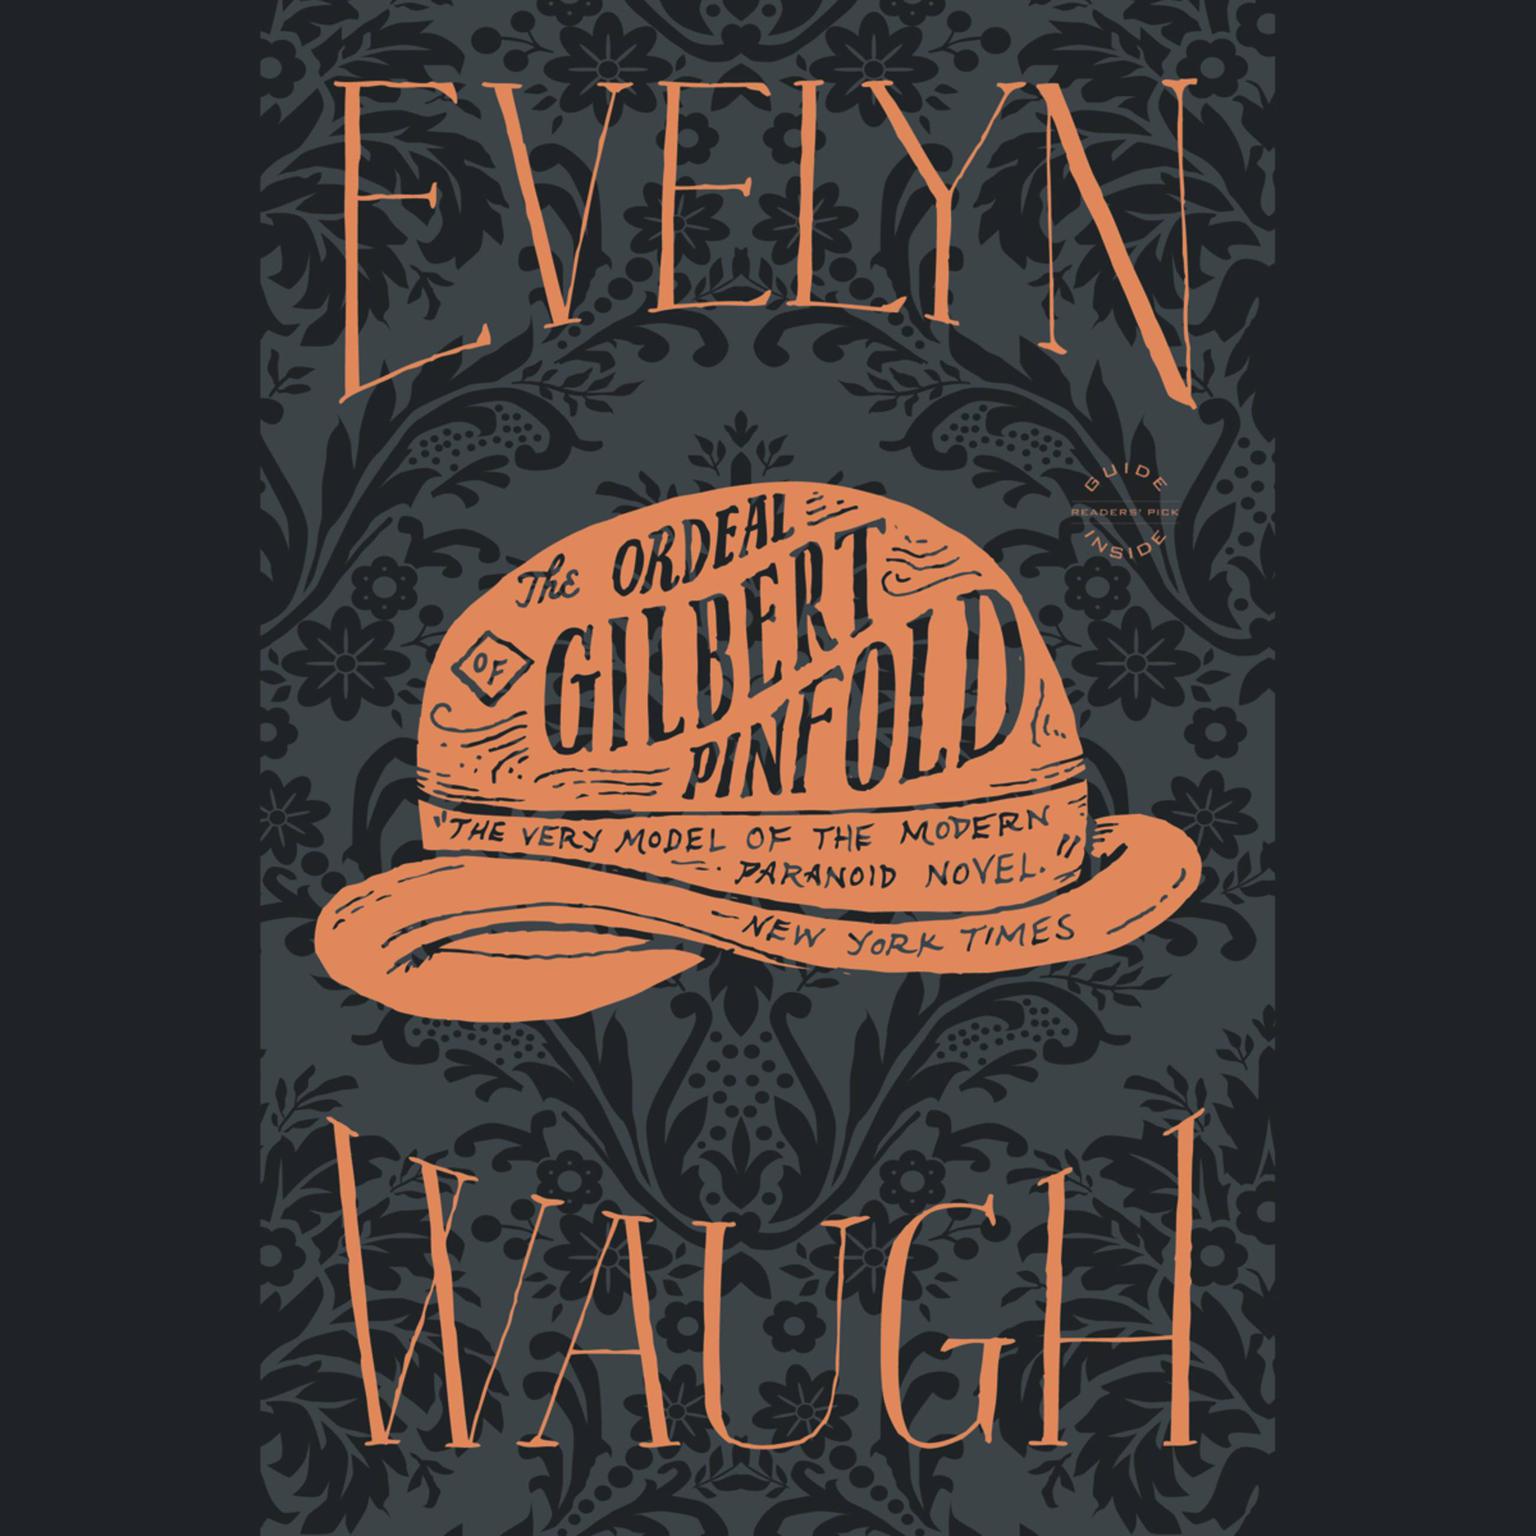 The Ordeal of Gilbert Pinfold Audiobook, by Evelyn Waugh